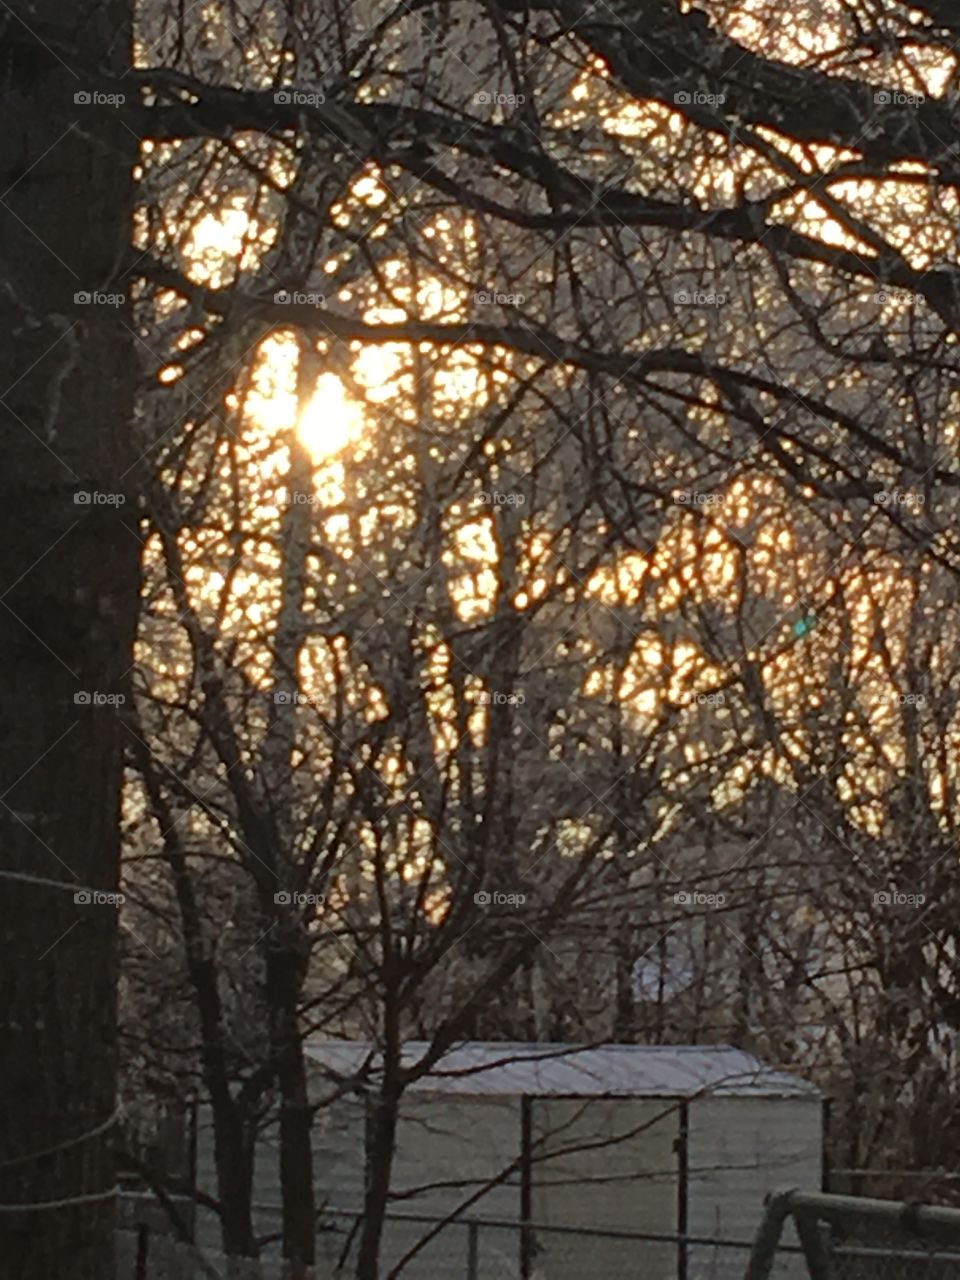 Suns breaking through the frozen trees with a golden hue. Soon it will be thawing.